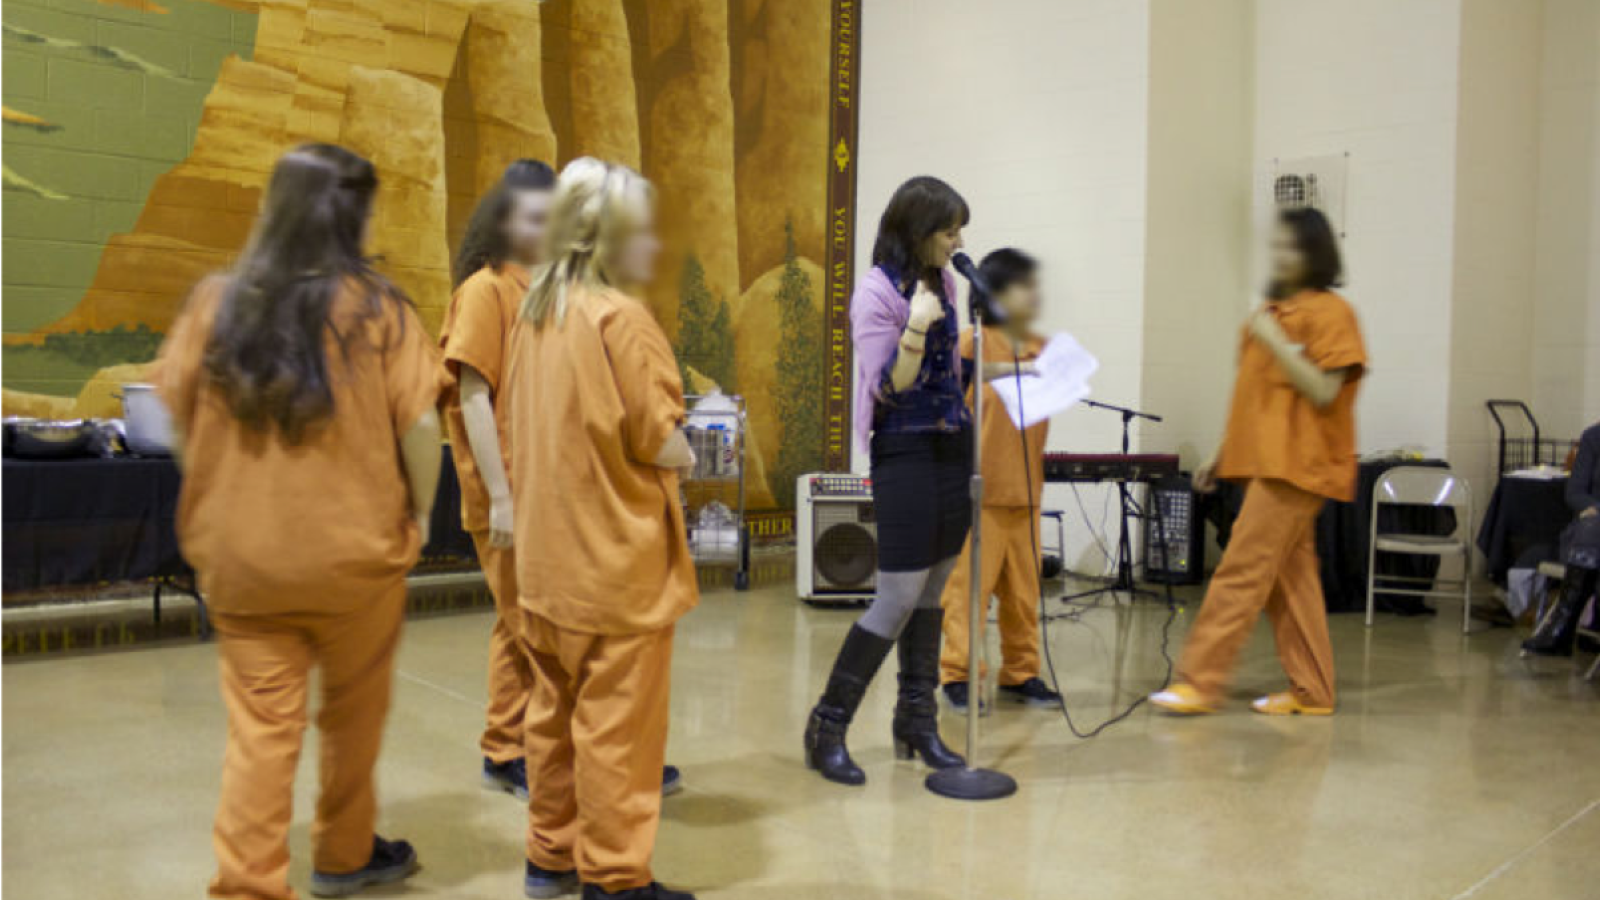 A woman with brown hair stands at the mic while girls in orange jumpsuits stand next to her. 